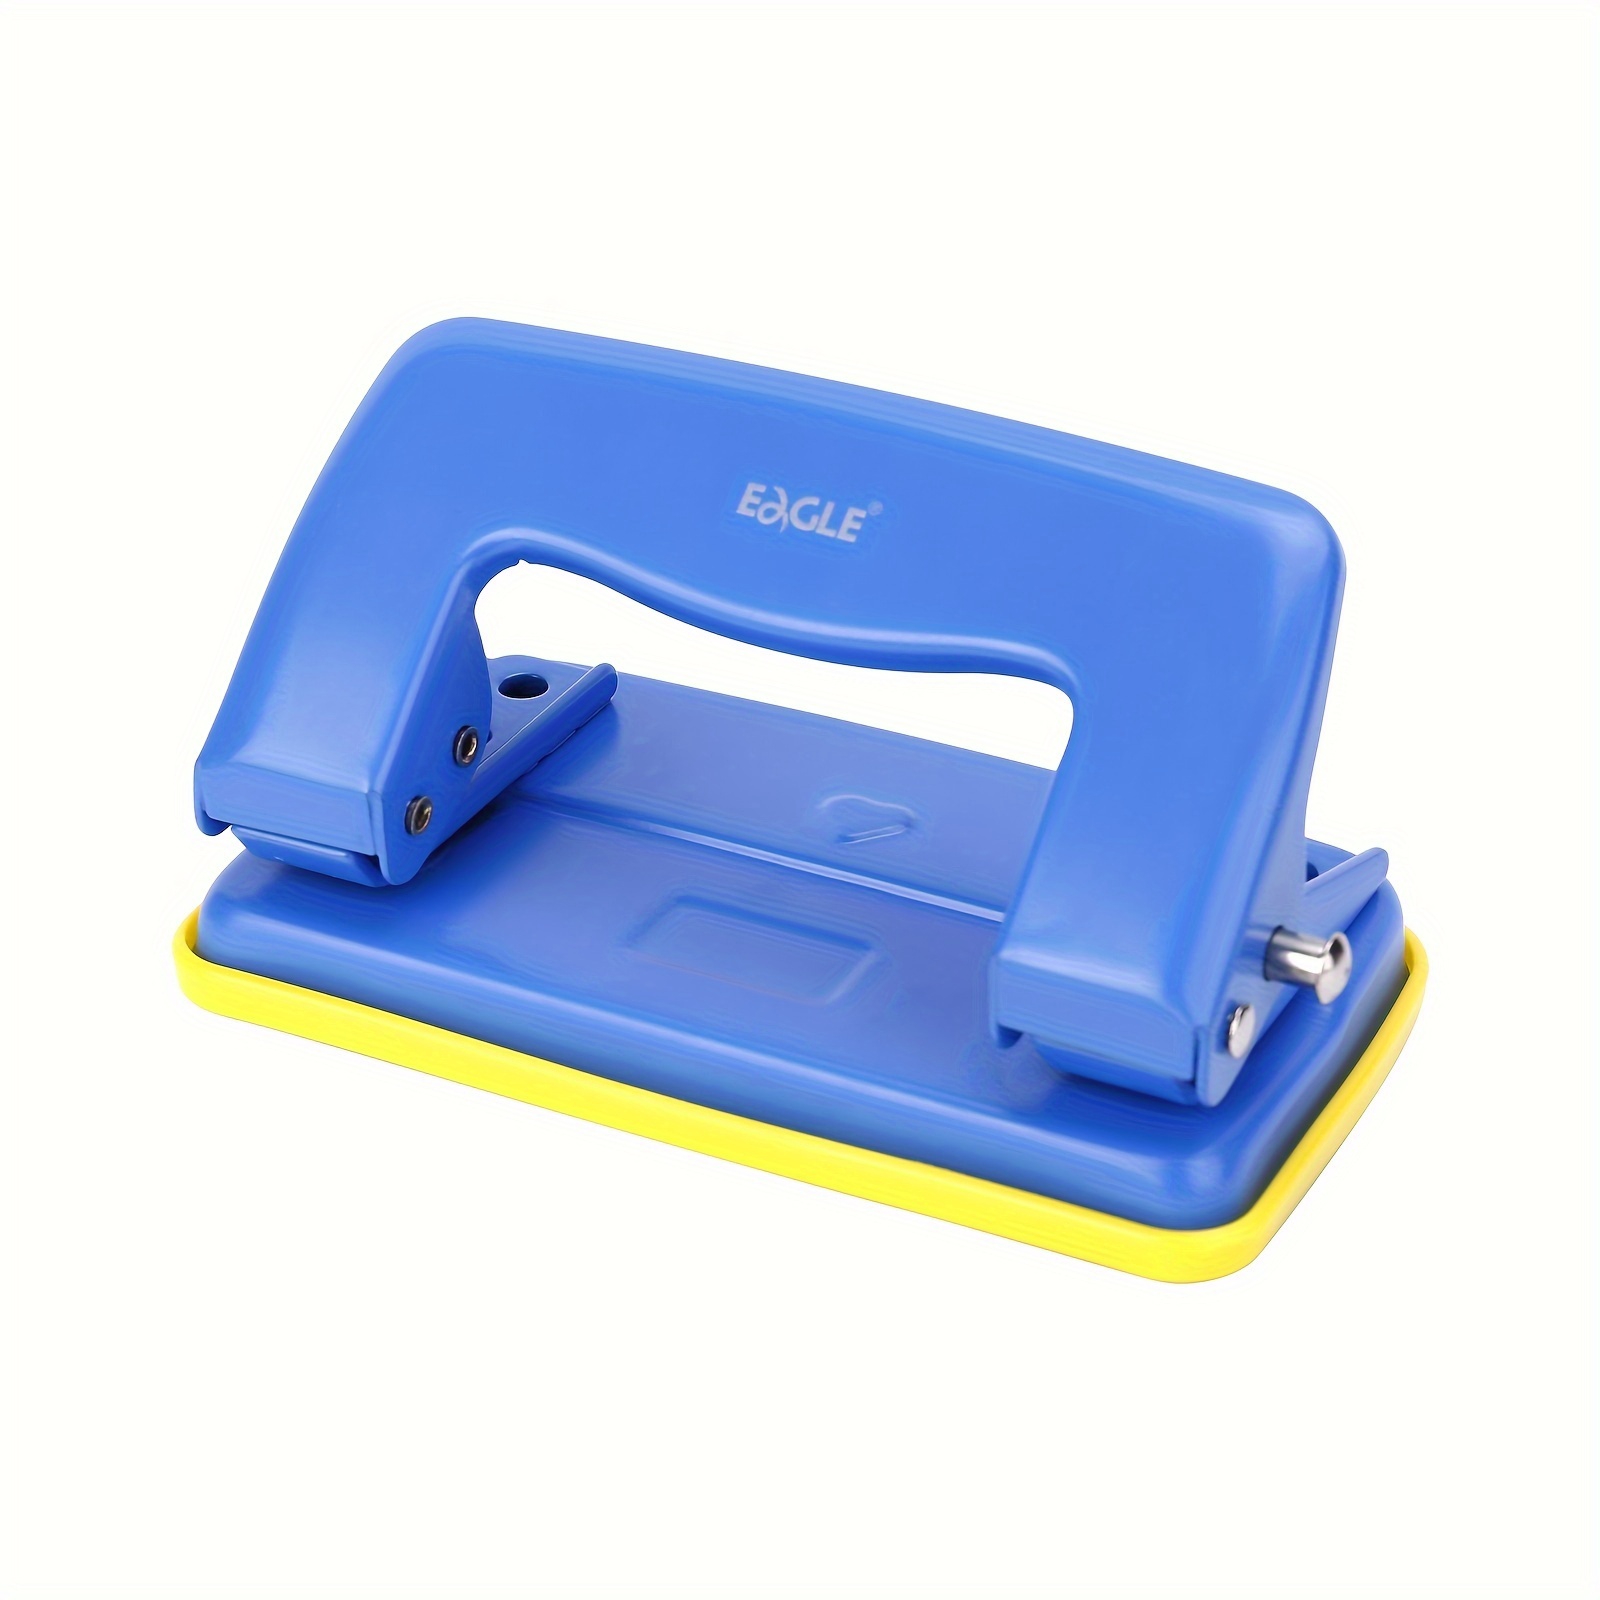 1pc Portable Metal Two-hole Puncher, Manual Punching Machine For Paper